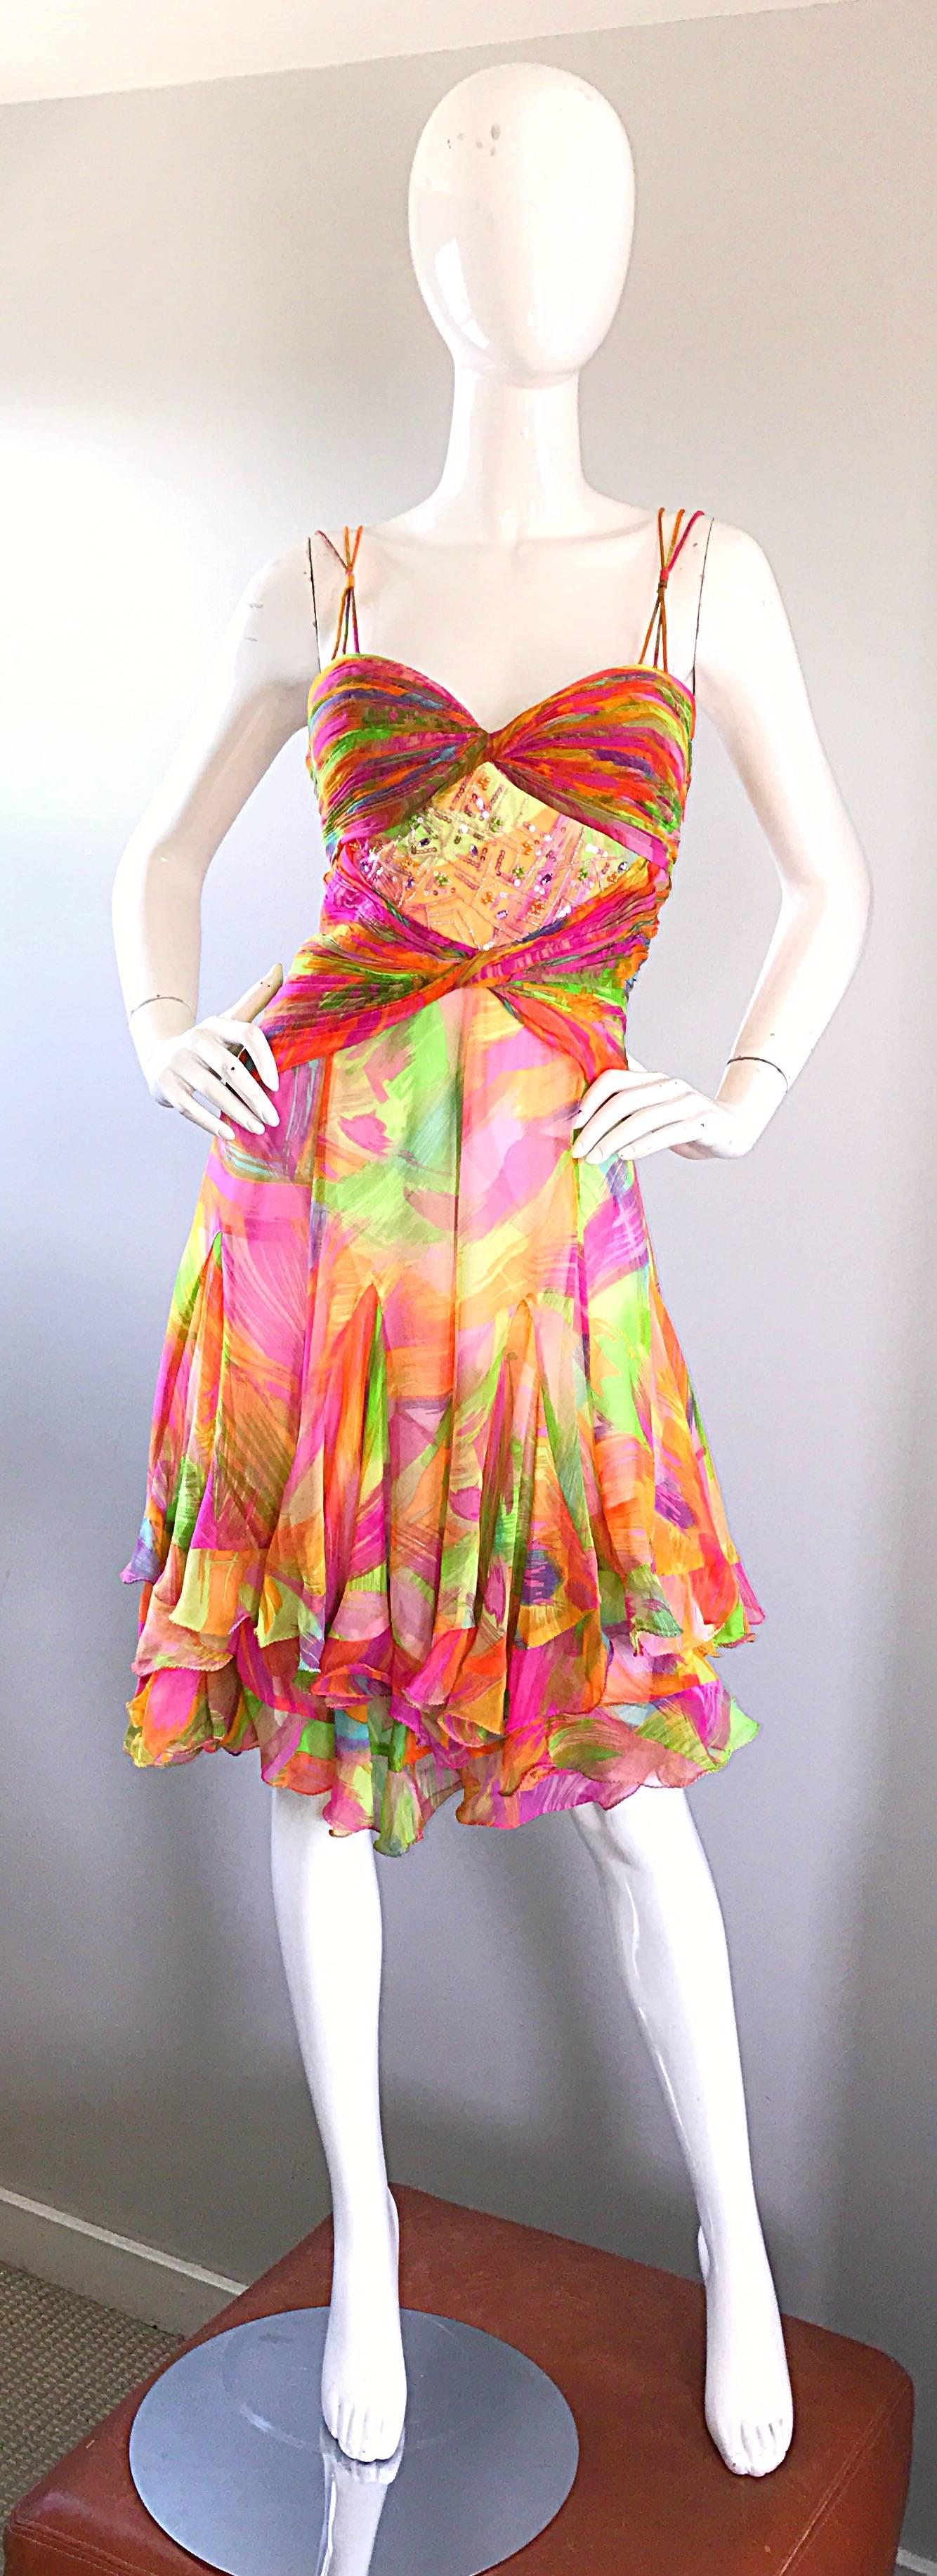 Insanely beautiful vintage (brand new with tags) 1990s DIANE FREIS bright neon silk chiffon dress! Features vibrant colors of pink, green, blue, orange and fuchsia throughout. Flattering ruched detail at stomach and bust. Triple strand straps at